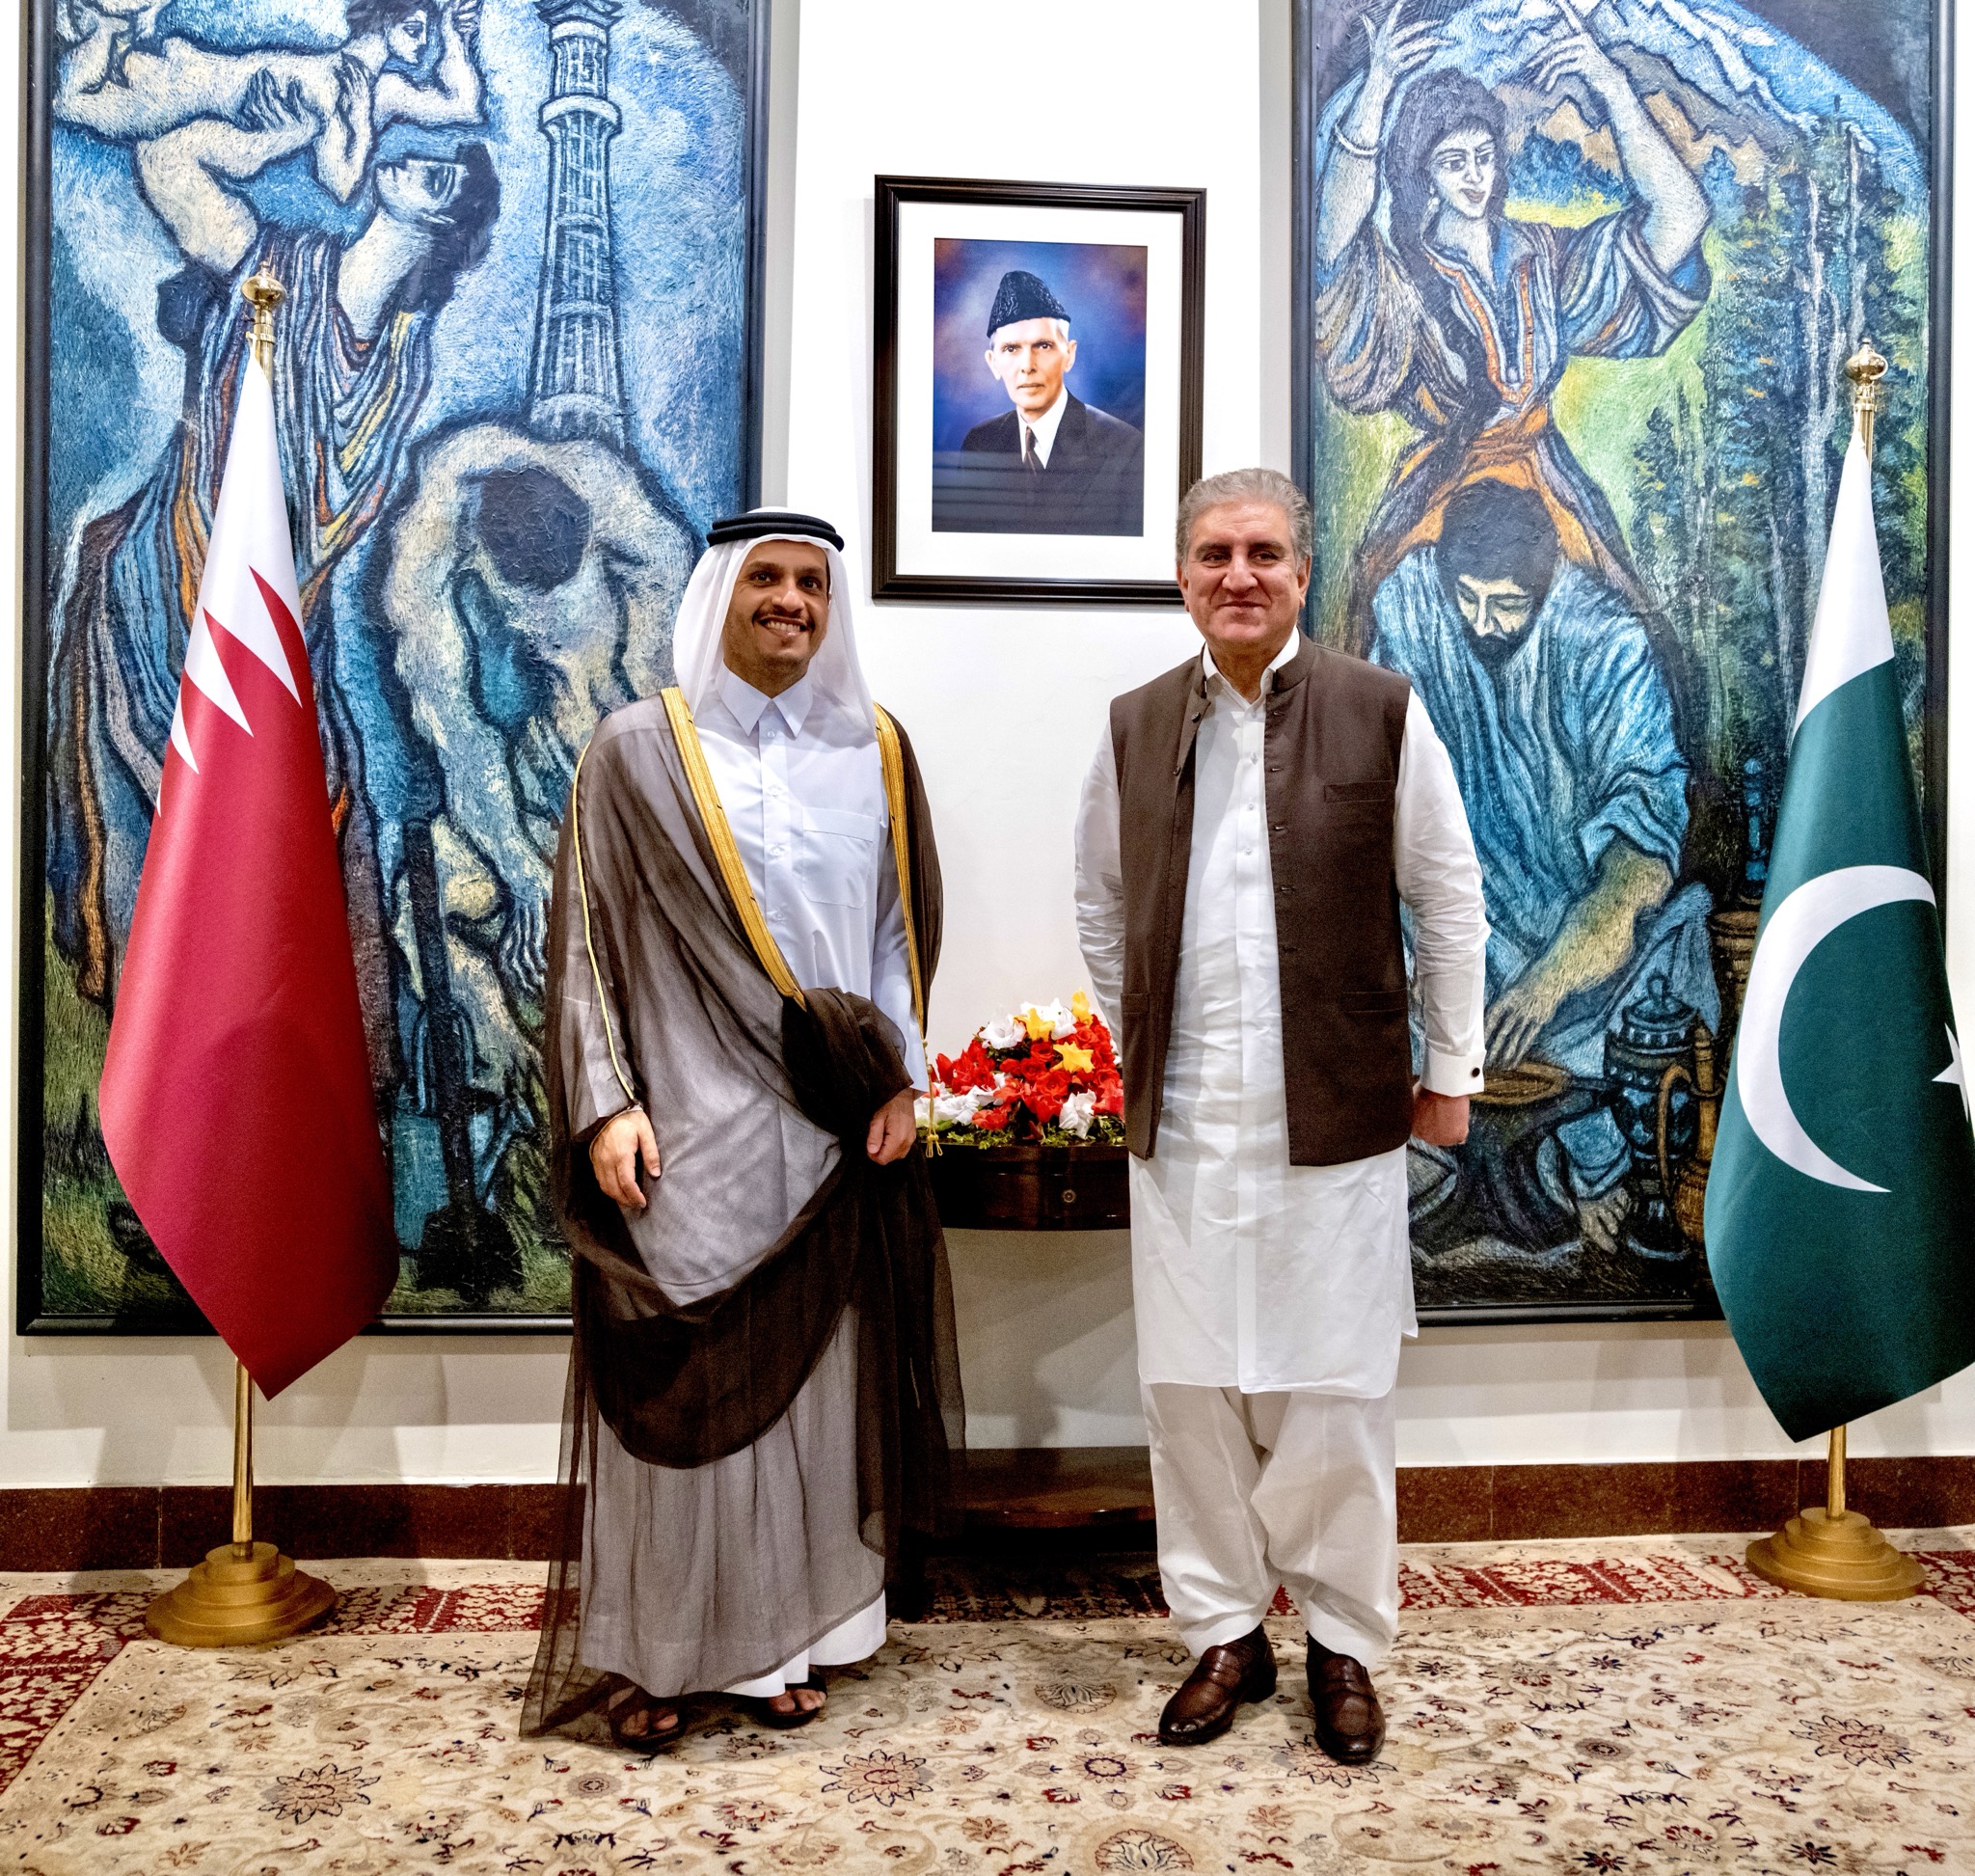 Deputy Prime Minister and Minister of Foreign Affairs Meets Pakistan's Foreign Minister, Chief of Army Staff